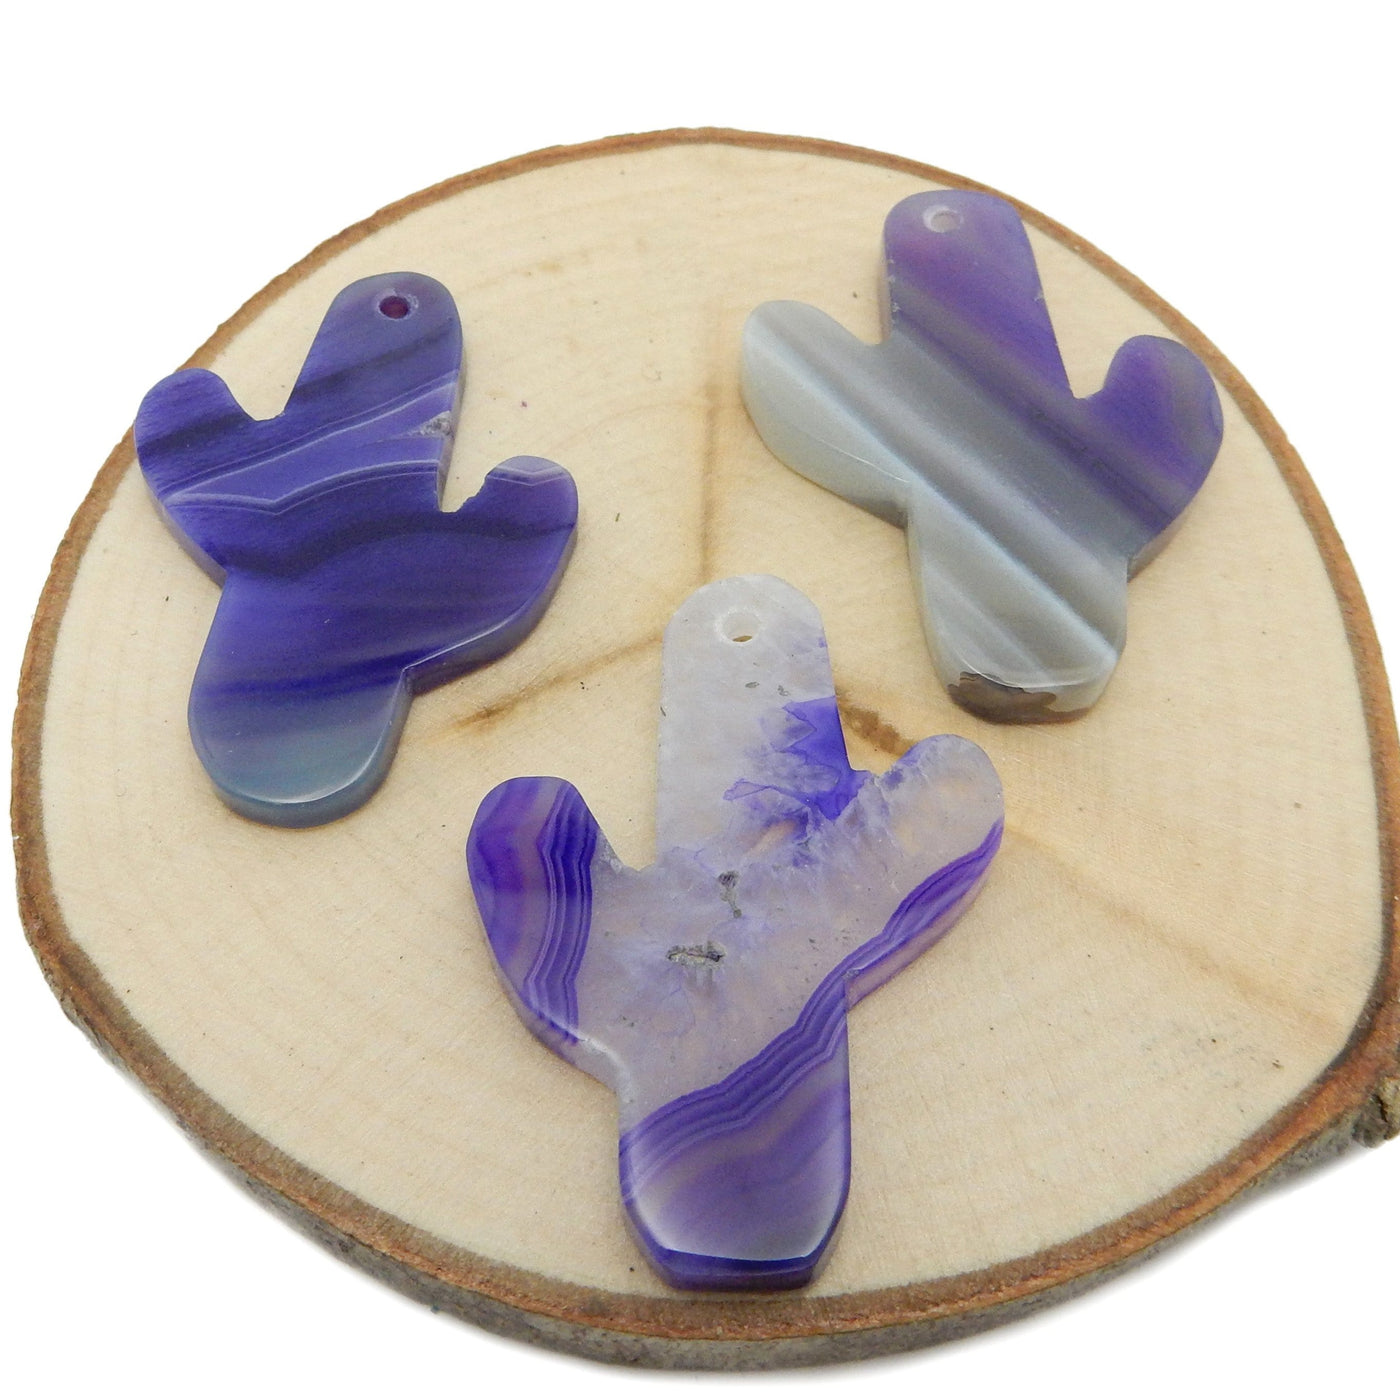 This picture is showing 3 of our purple cactus agates, being displayed on a wooden platform.